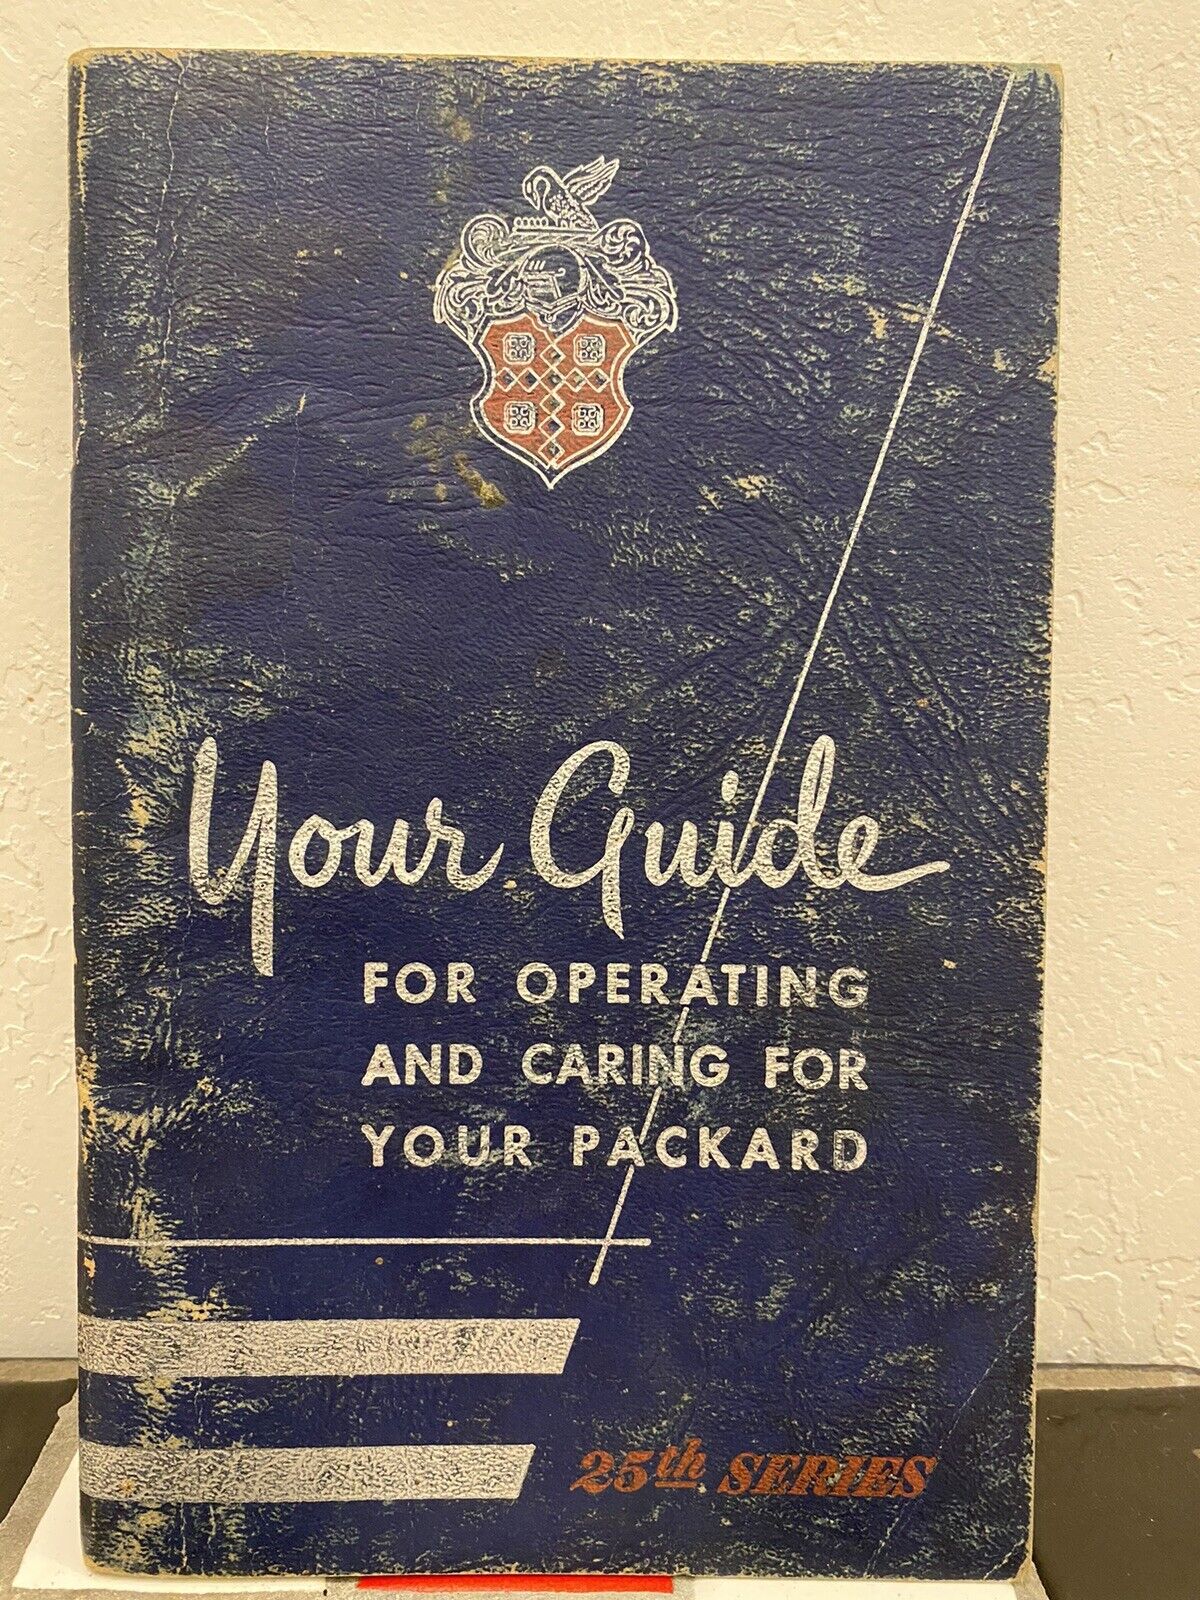 Packad Your Guide 25th Series 